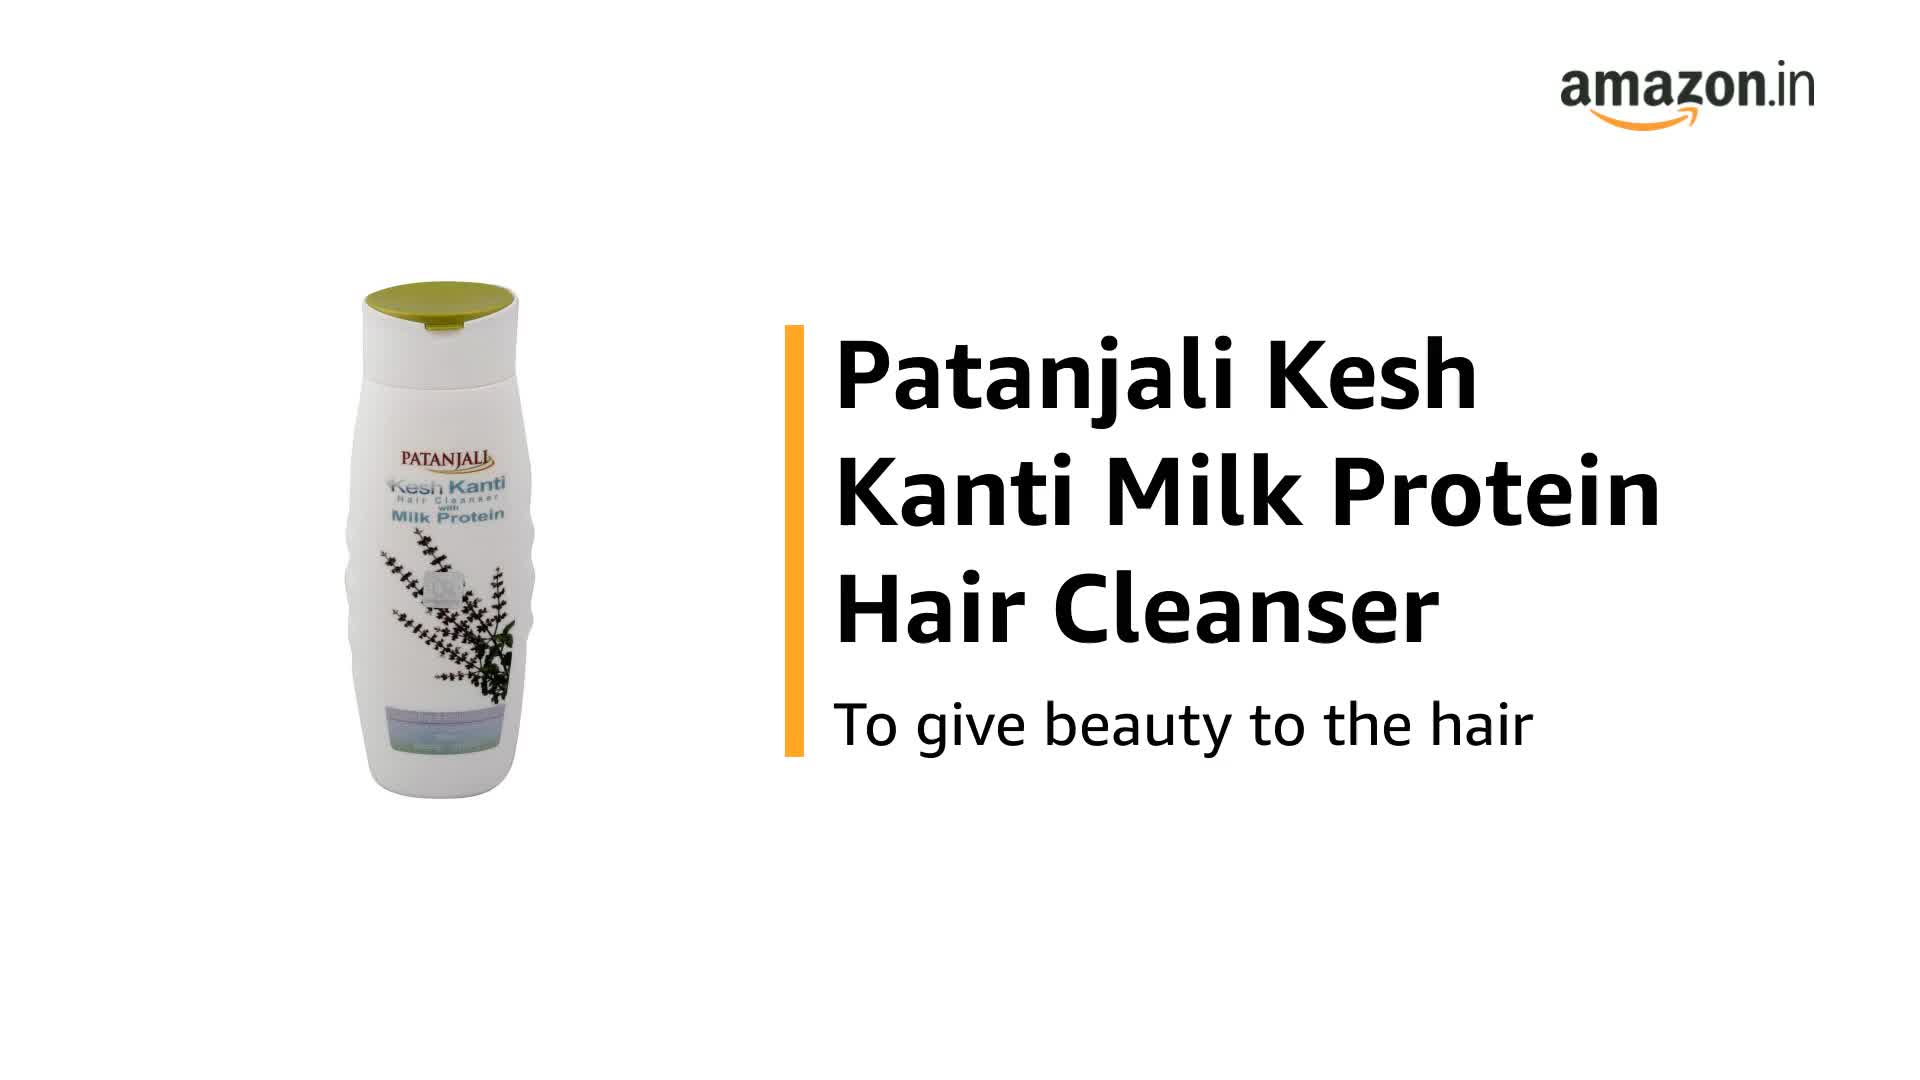 Patanjali Kesh Kanti Milk Protein Hair Cleanser Shampoo 200ml - the best  price and delivery | Globally